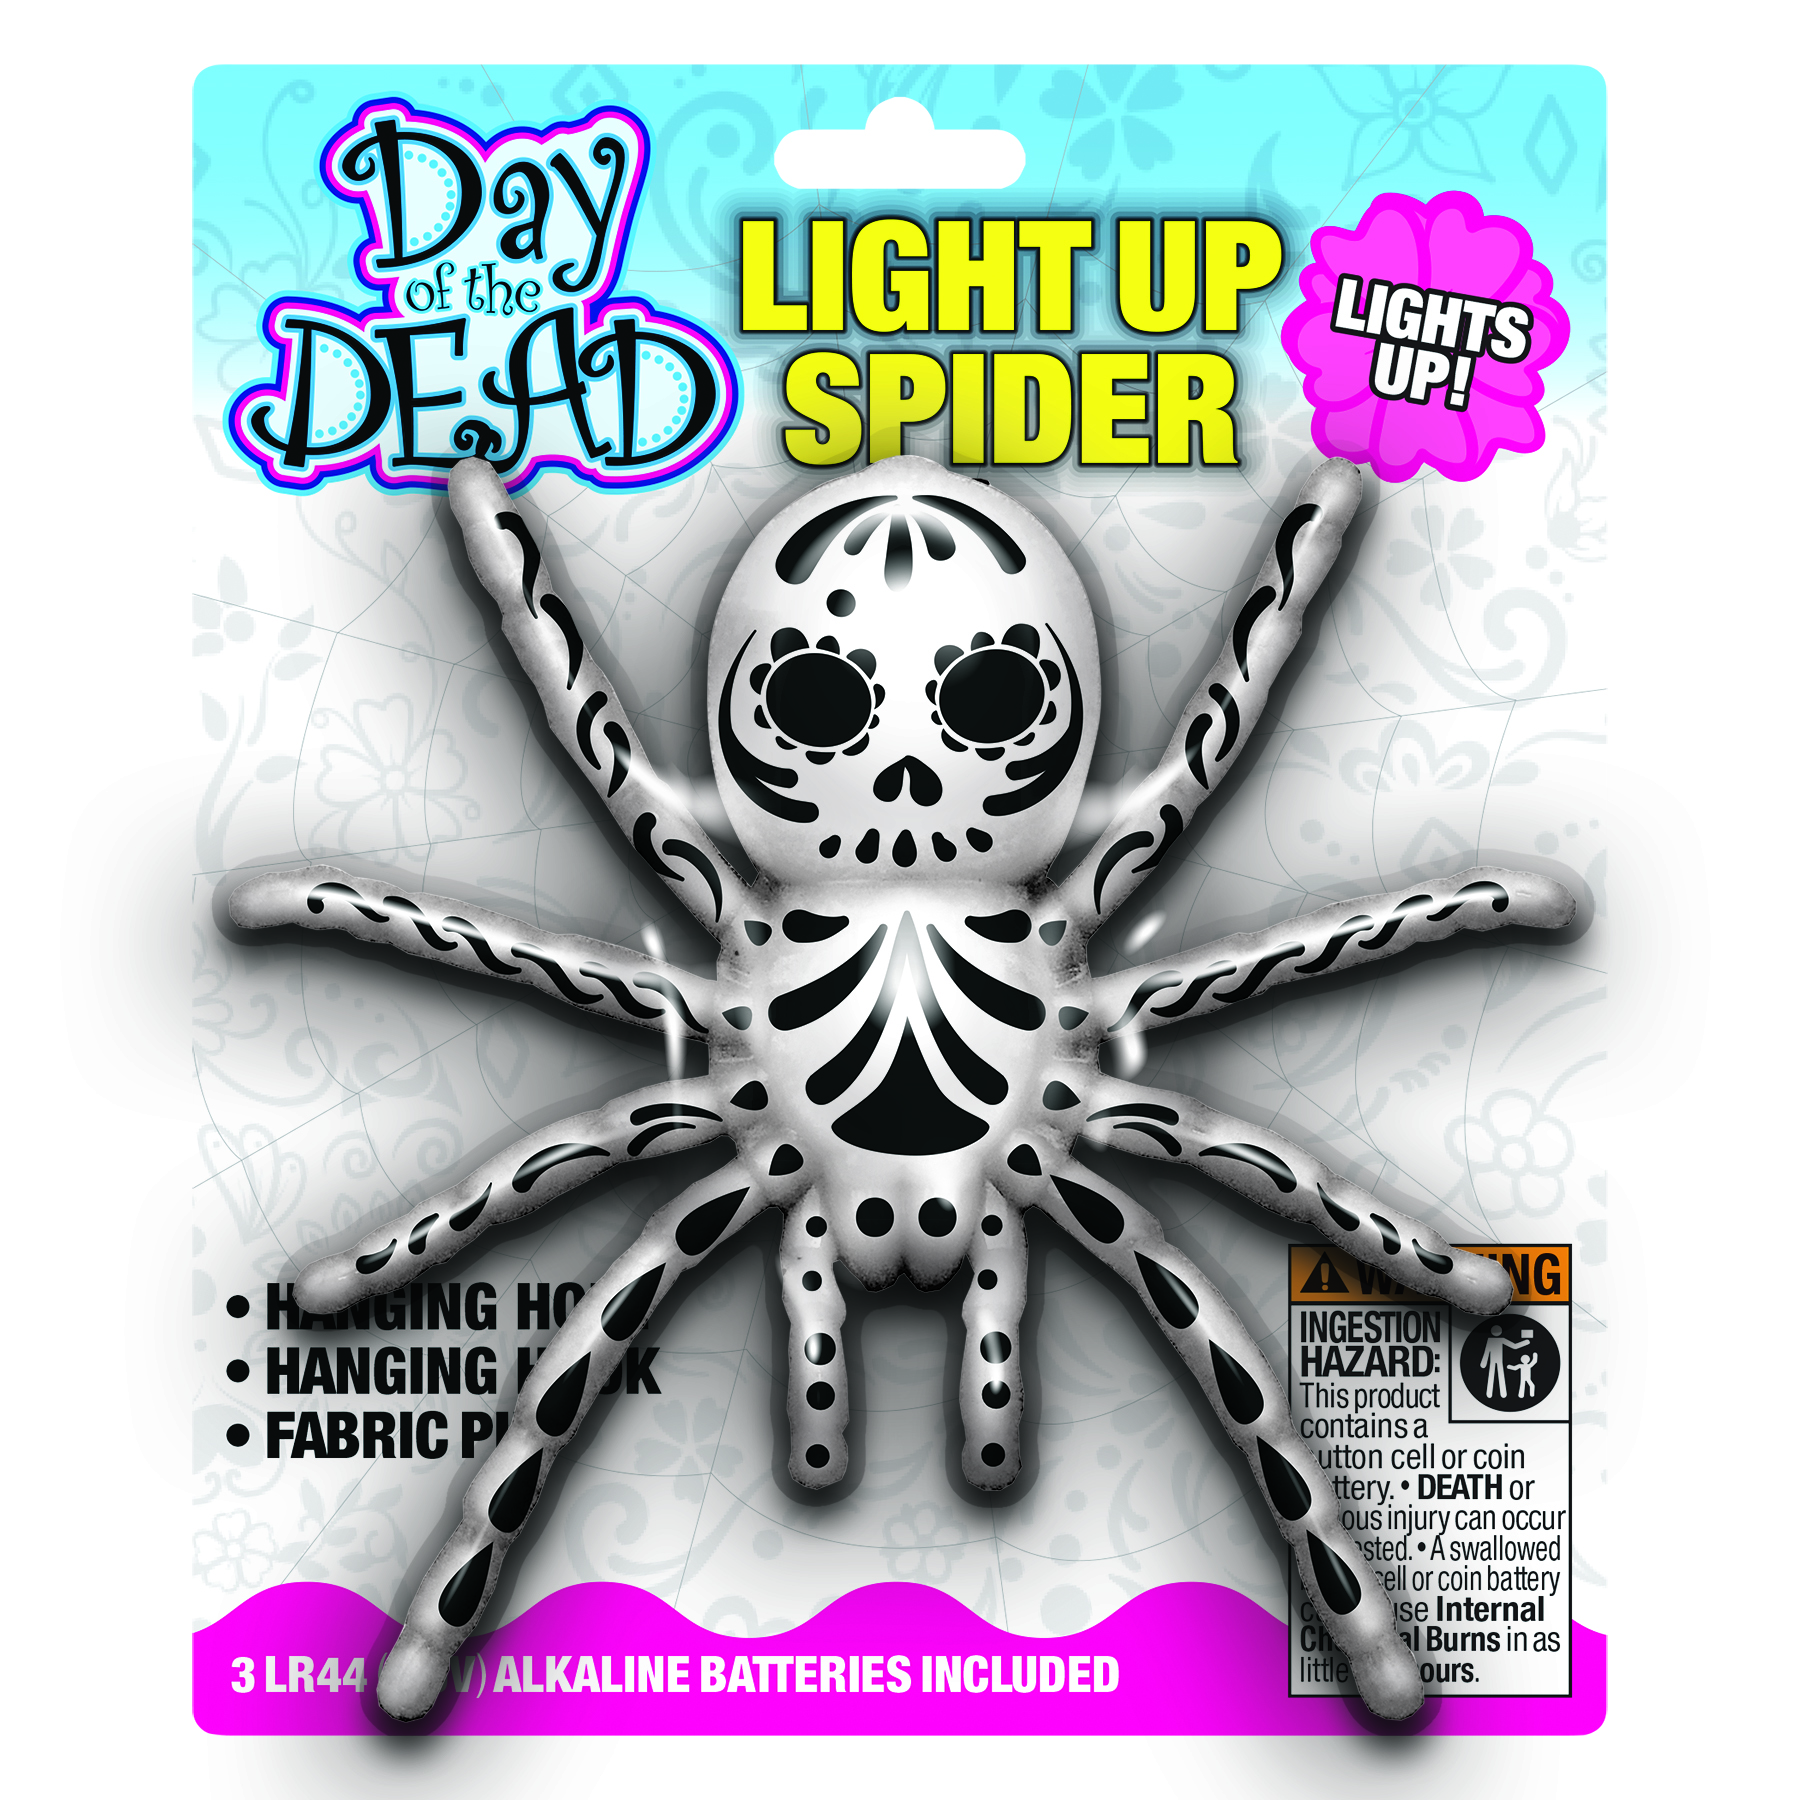 Day of the Dead LED Spider